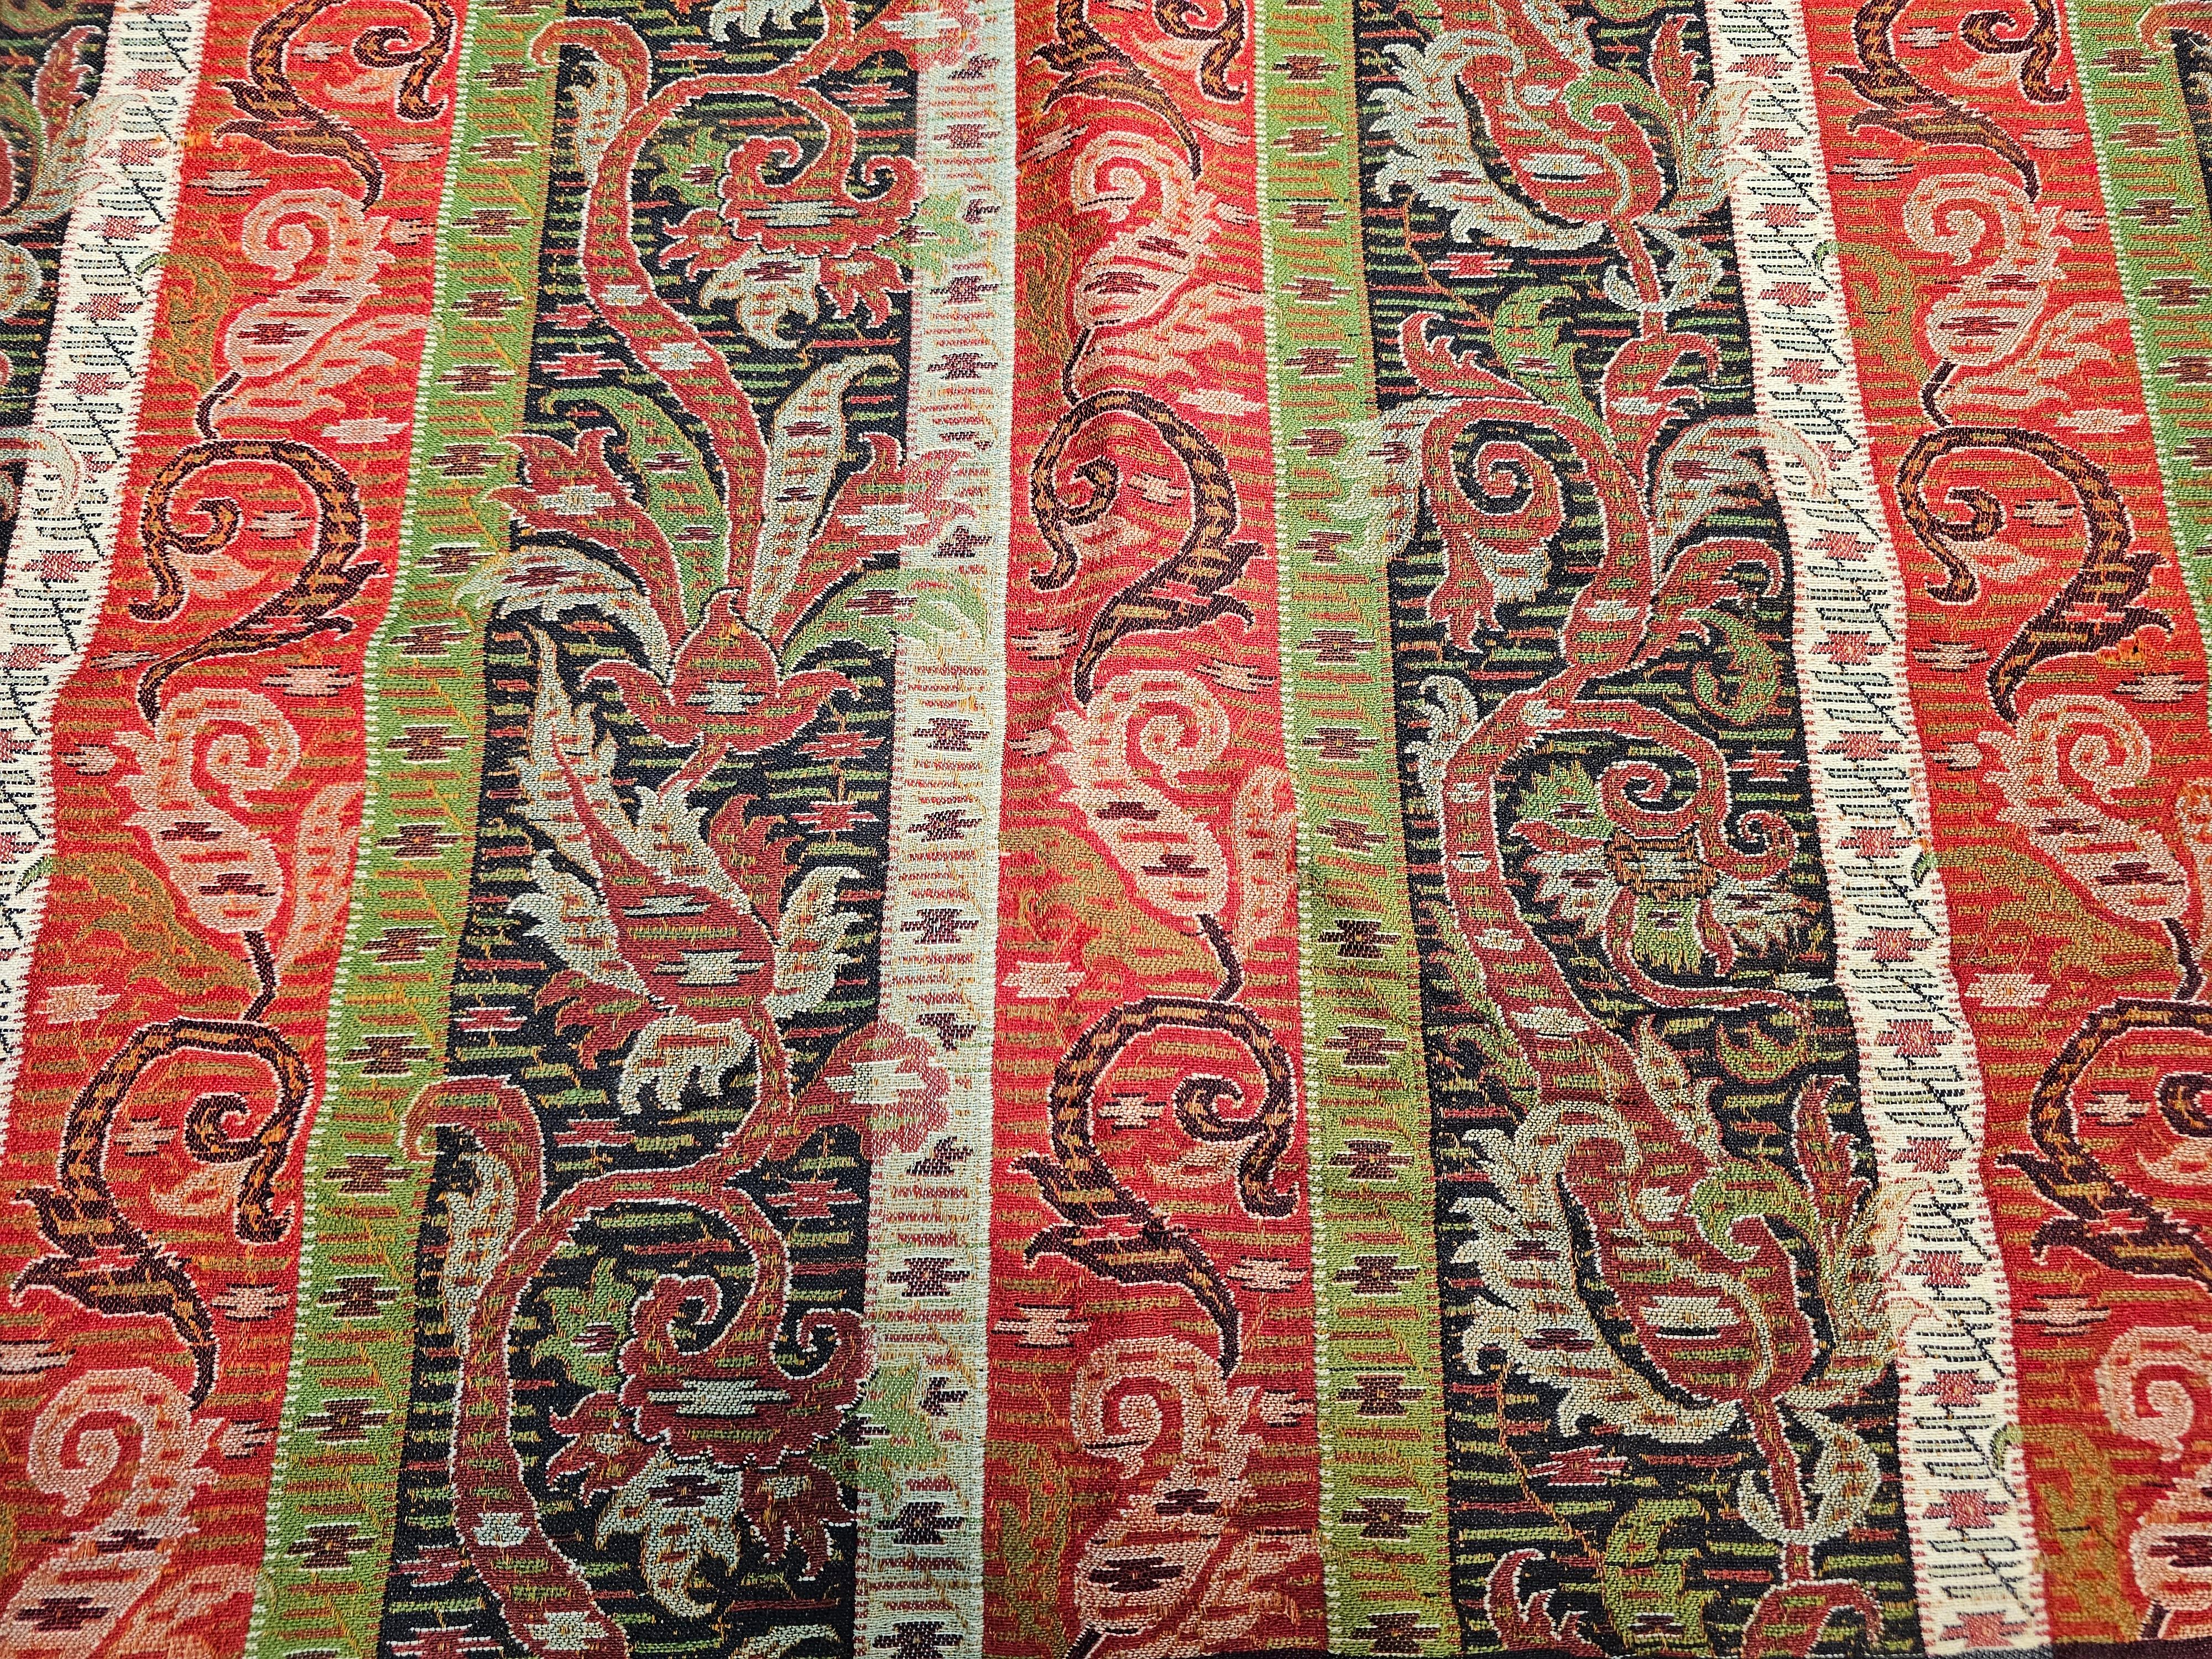 Wool 19th Century Hand-Woven Kashmiri Paisley Shawl in Brick Red, Ivory, Black, Green For Sale